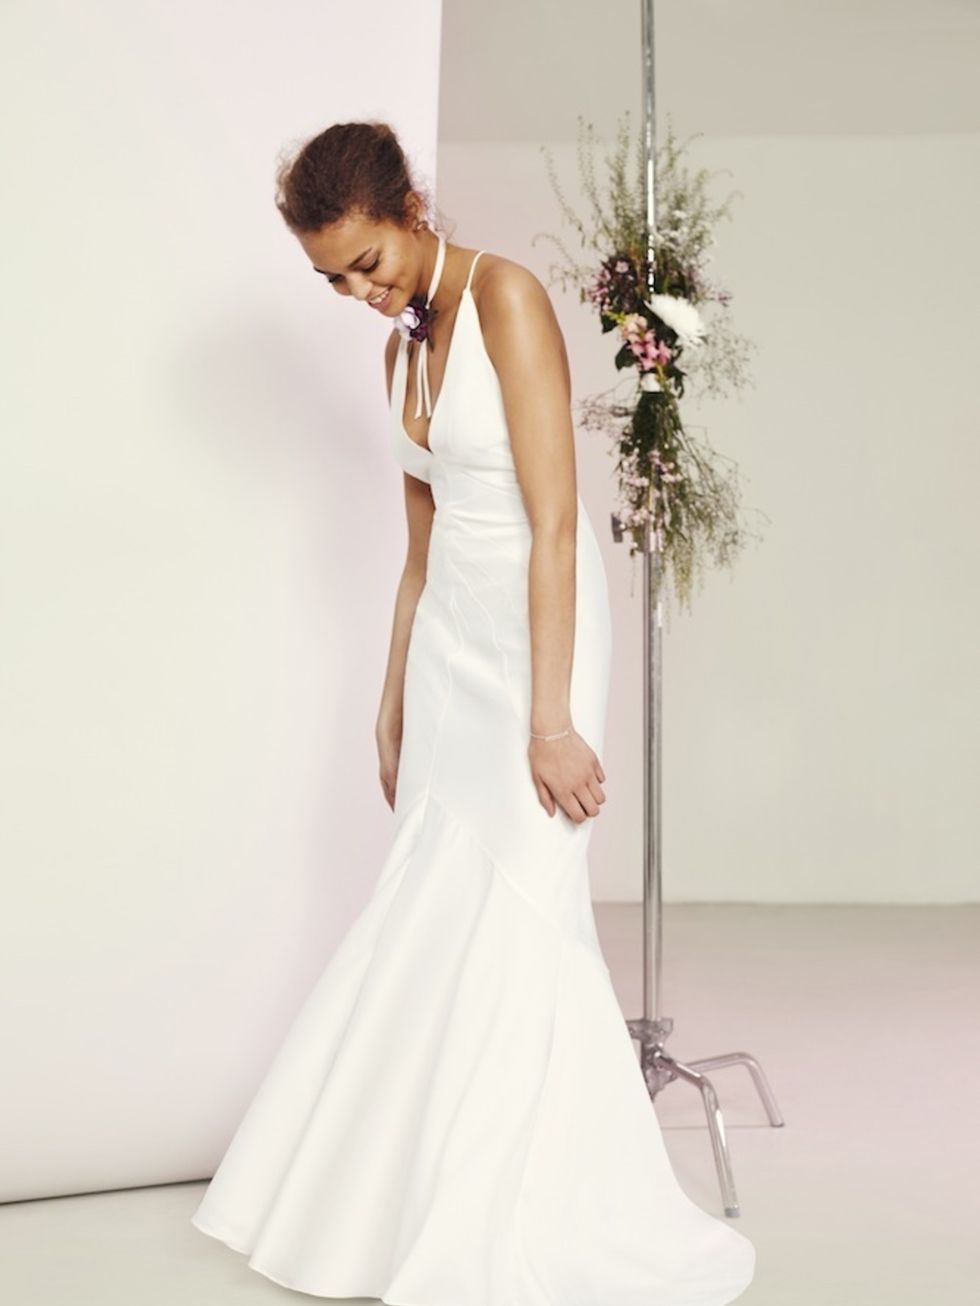 <p>Deep plunge strappy fishtail maxi, £95, <a href="http://www.asos.com/ASOS/ASOS-BRIDAL-Deep-Plunge-Strappy-Fishtail-Maxi-Dress/Prod/pgeproduct.aspx?iid=5911920&cid=2623&sh=0&pge=0&pgesize=36&sort=-1&clr=White&totalstyles=398&gridsize=3" style="line-heig